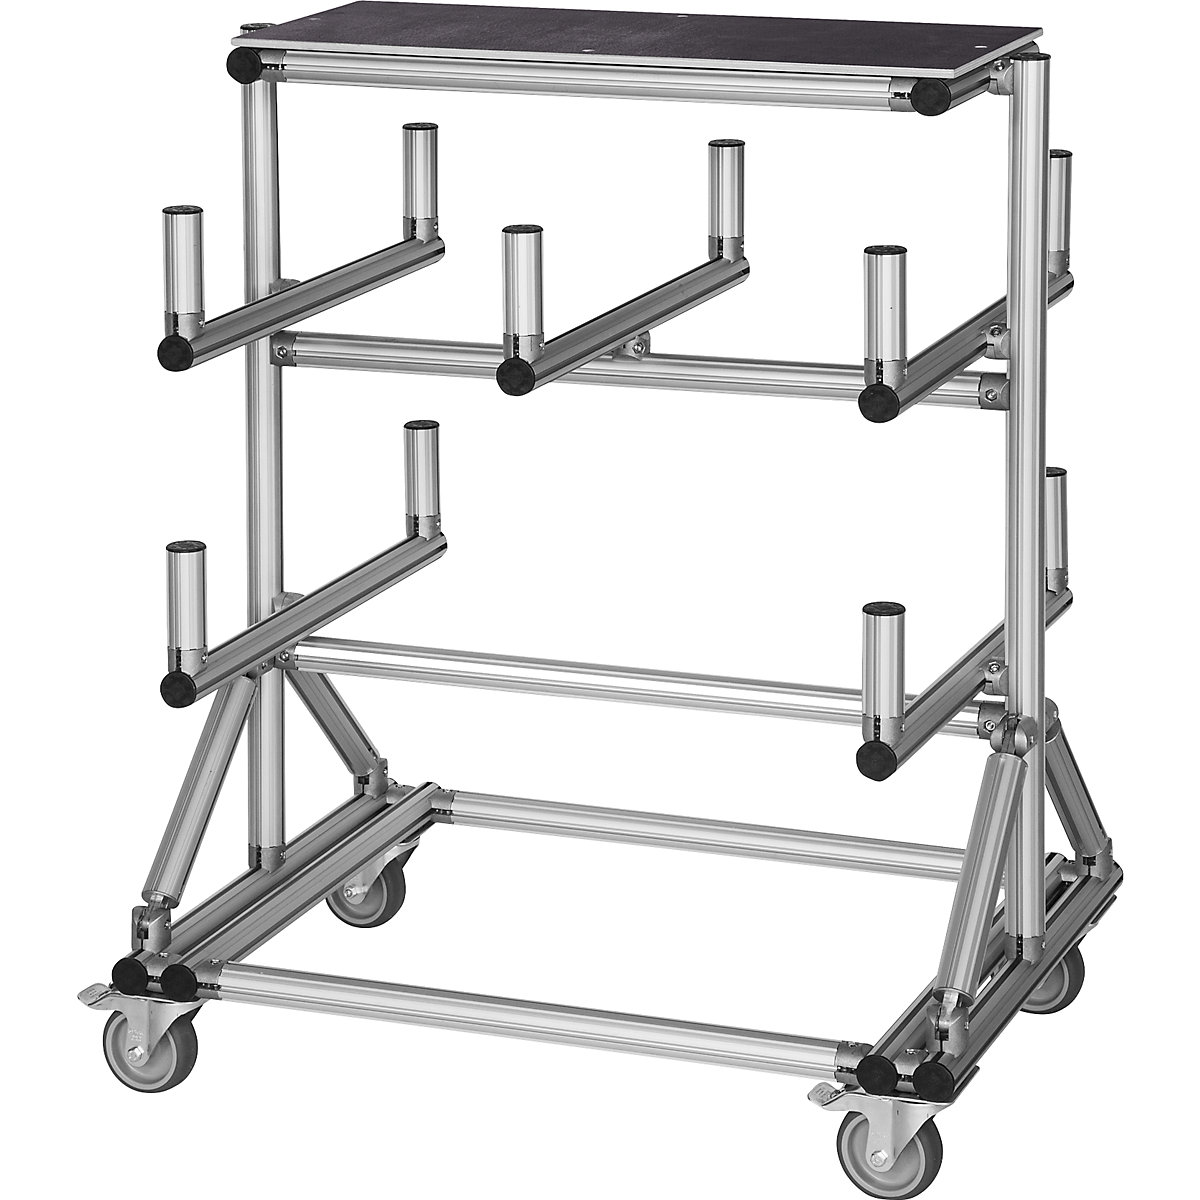 SUPPORT KING cantilever trolley made of aluminium profile